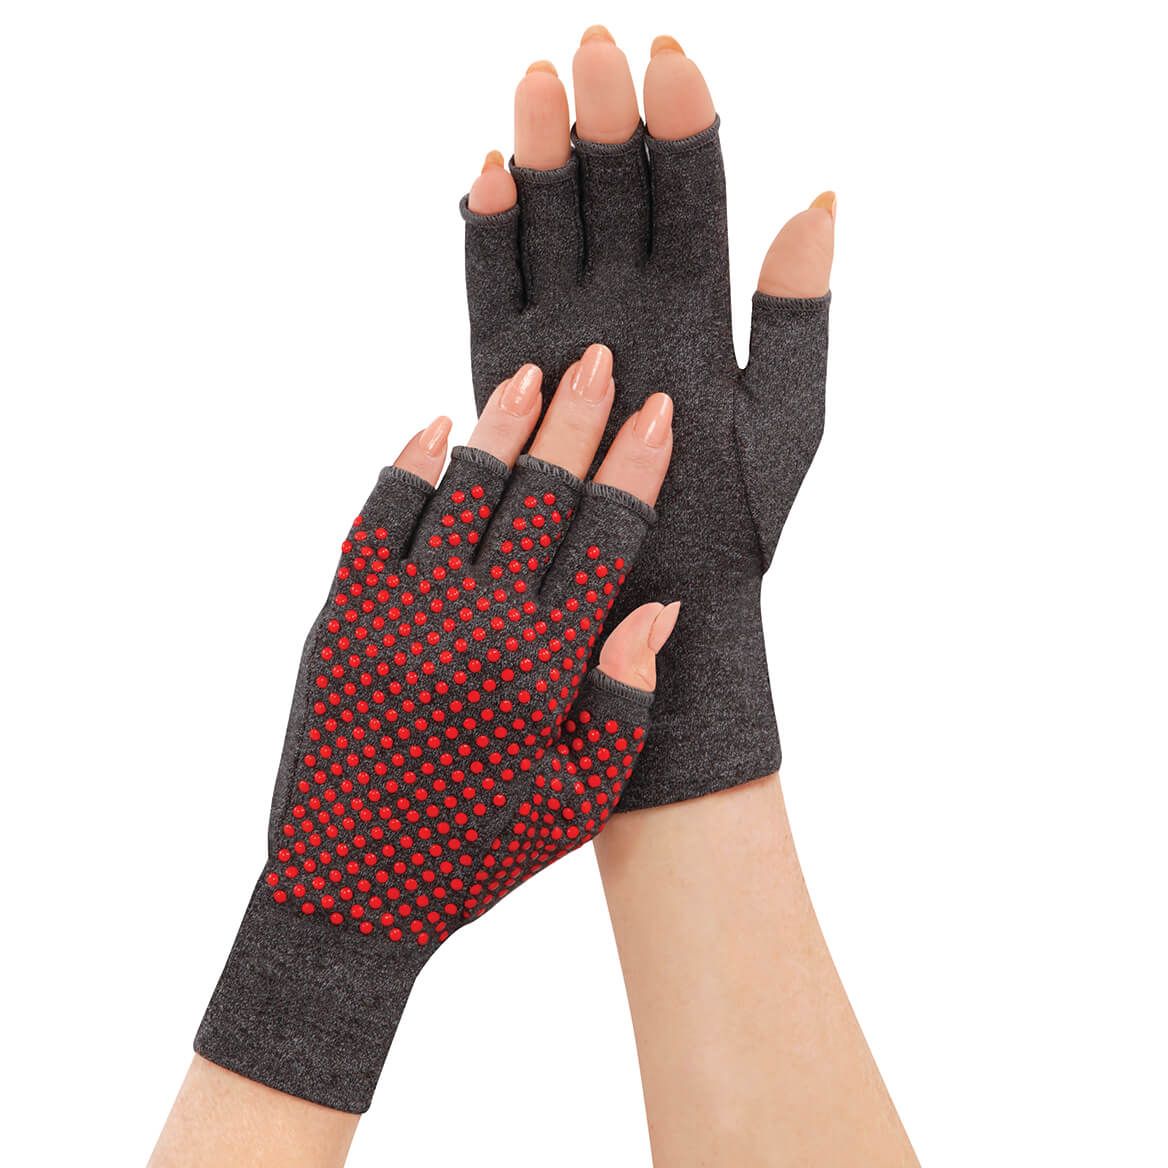 Therapeutic Infrared Gloves 1 Pair + '-' + 370126